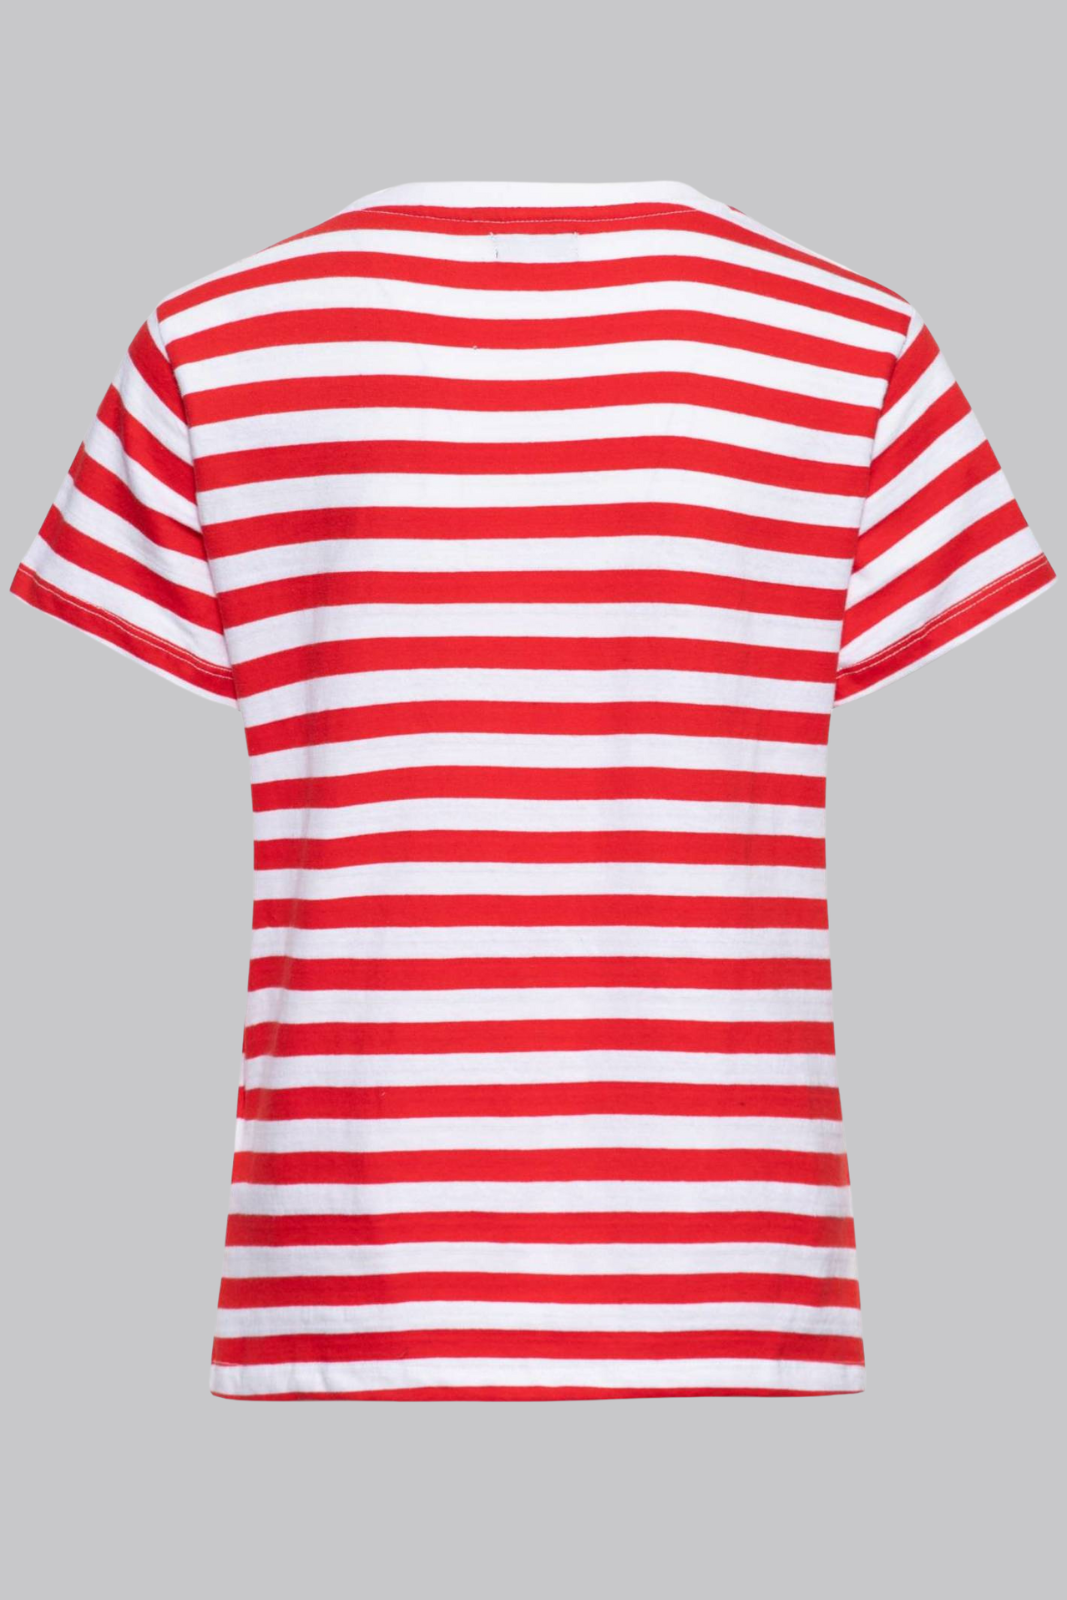 Striped Shirt Speed Queens - Red & White (Ladies Fit)